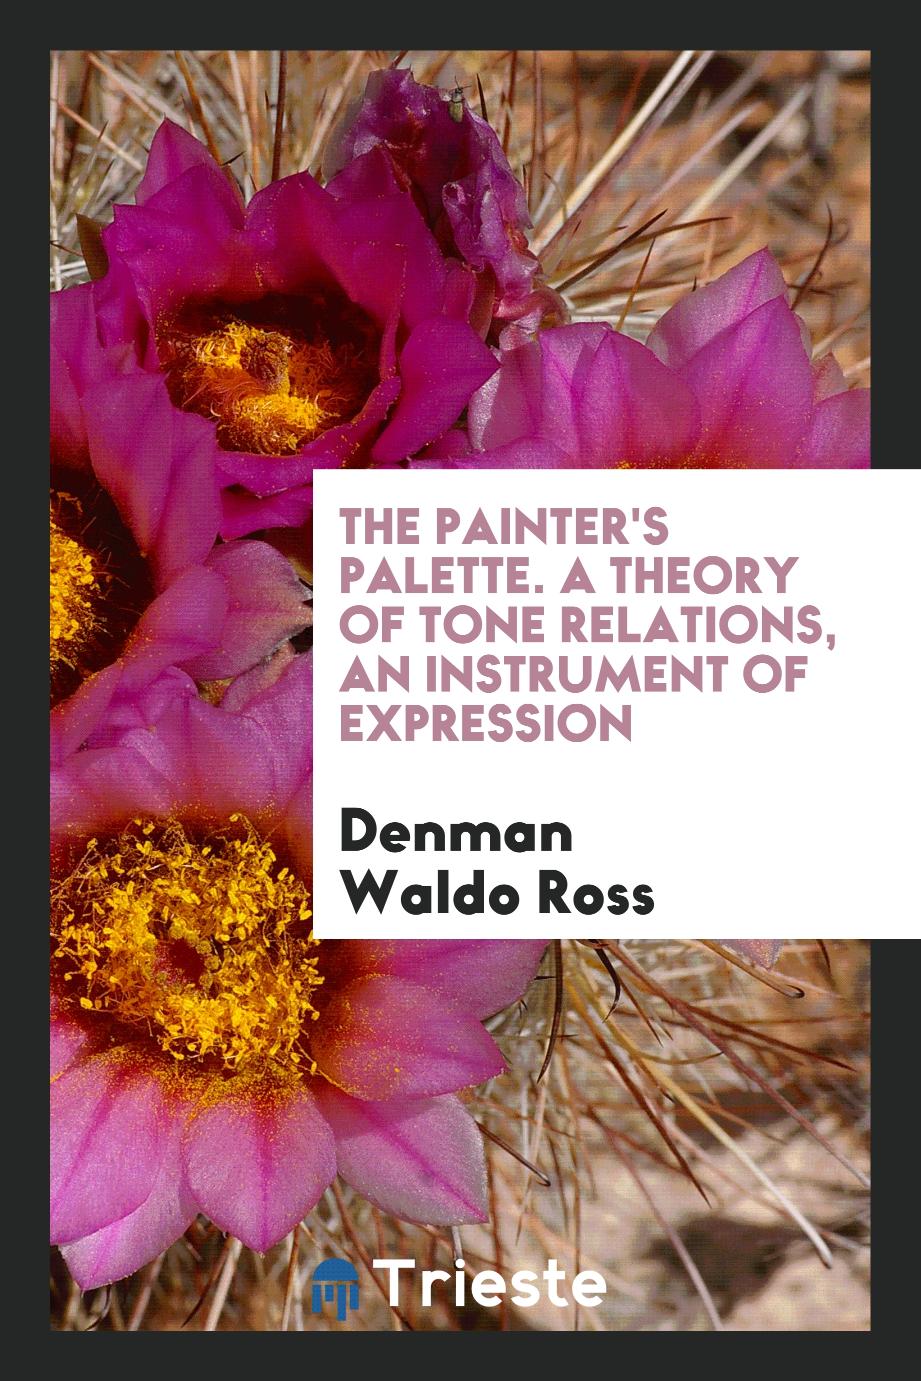 The Painter's Palette. A Theory of Tone Relations, an Instrument of Expression